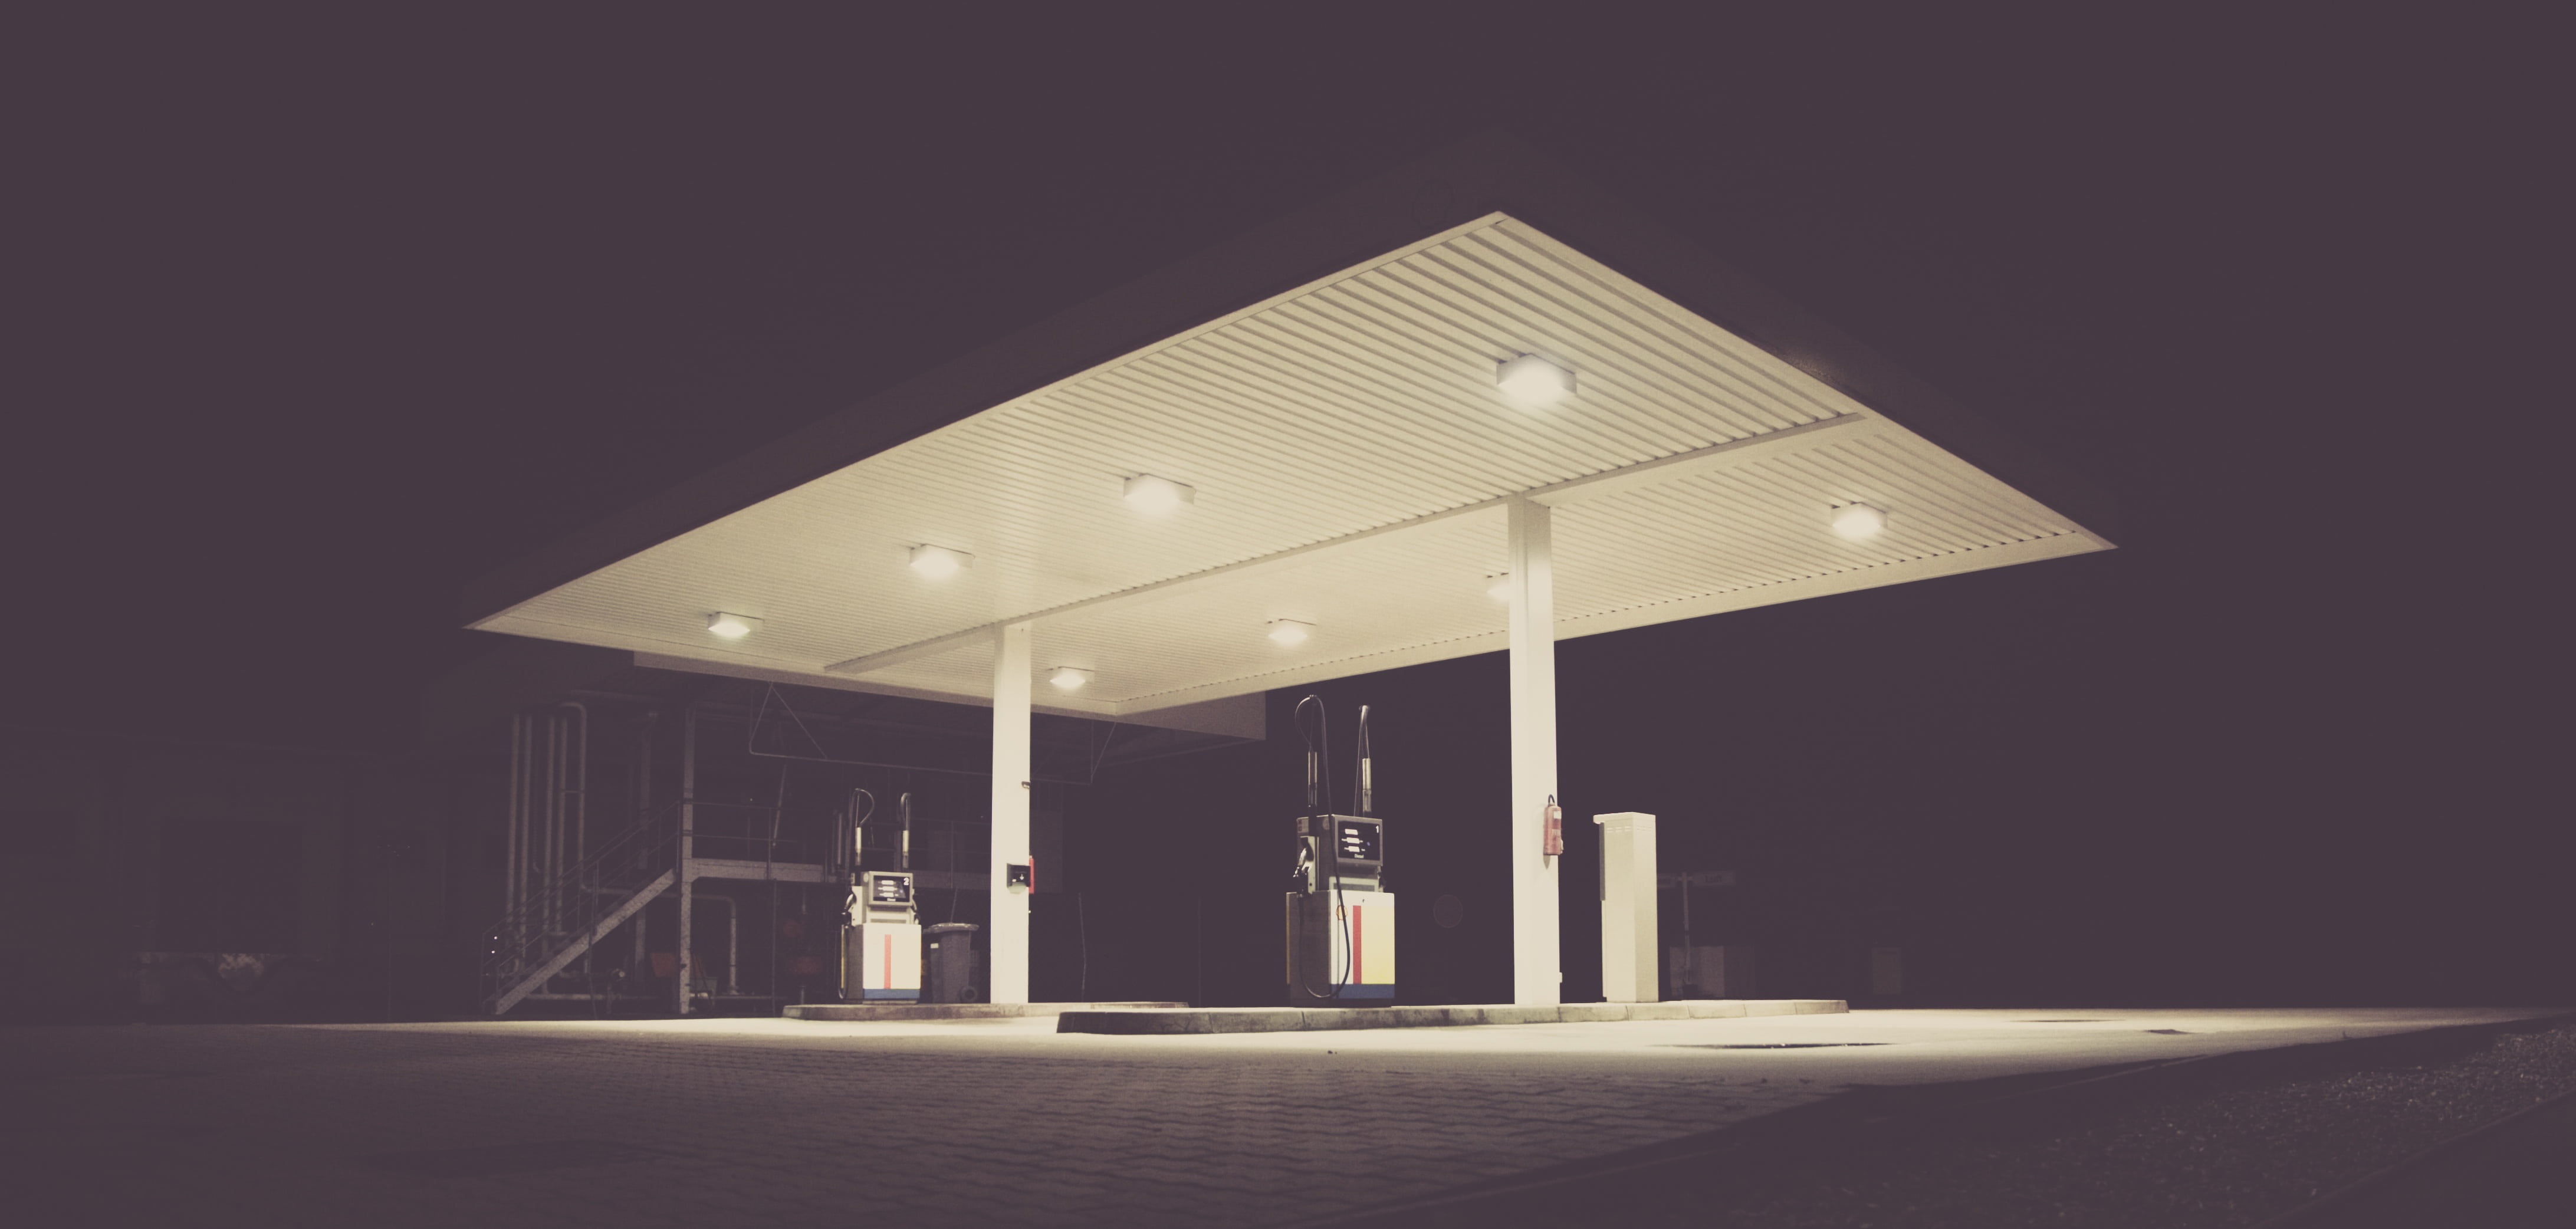 California towns are banning new gas stations. That has Big Oil's attention